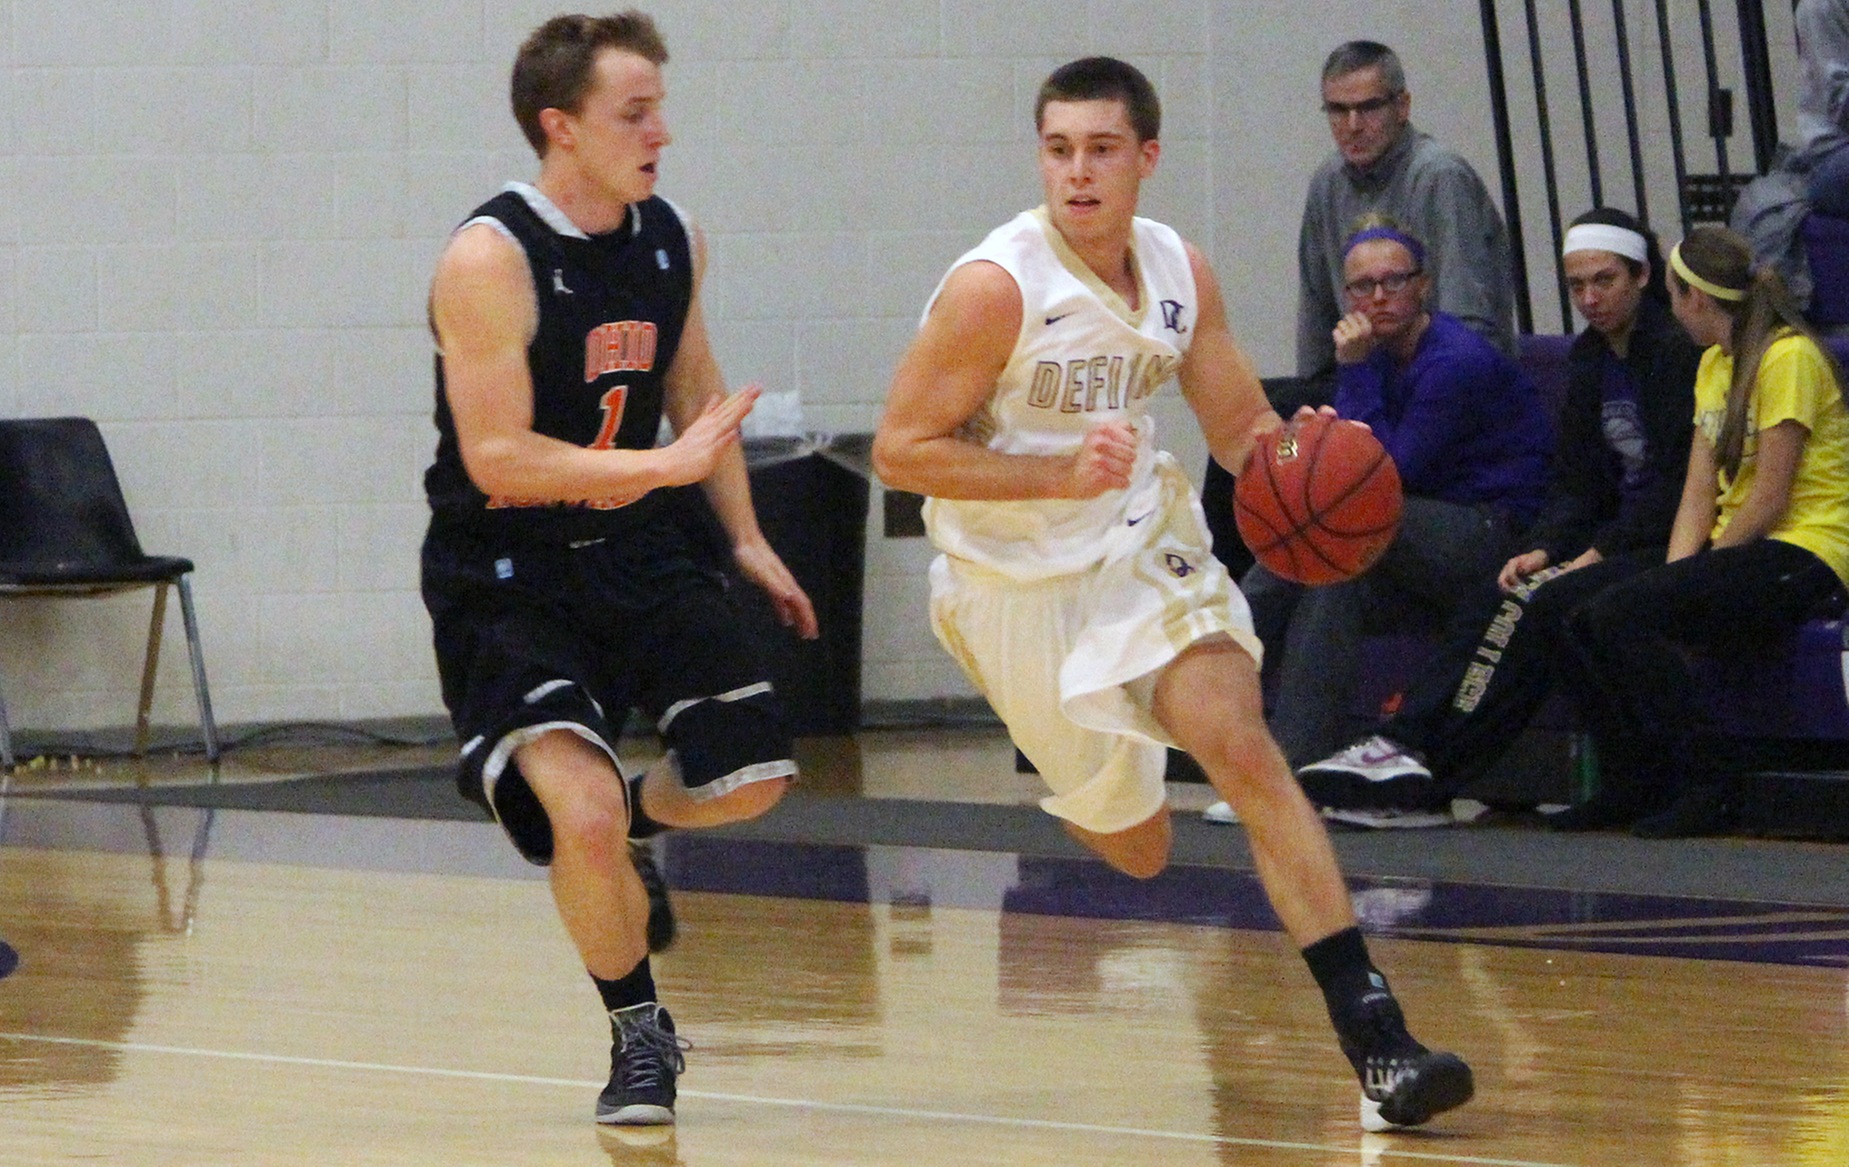 Defiance opens home schedule with 70-66 win over ONU